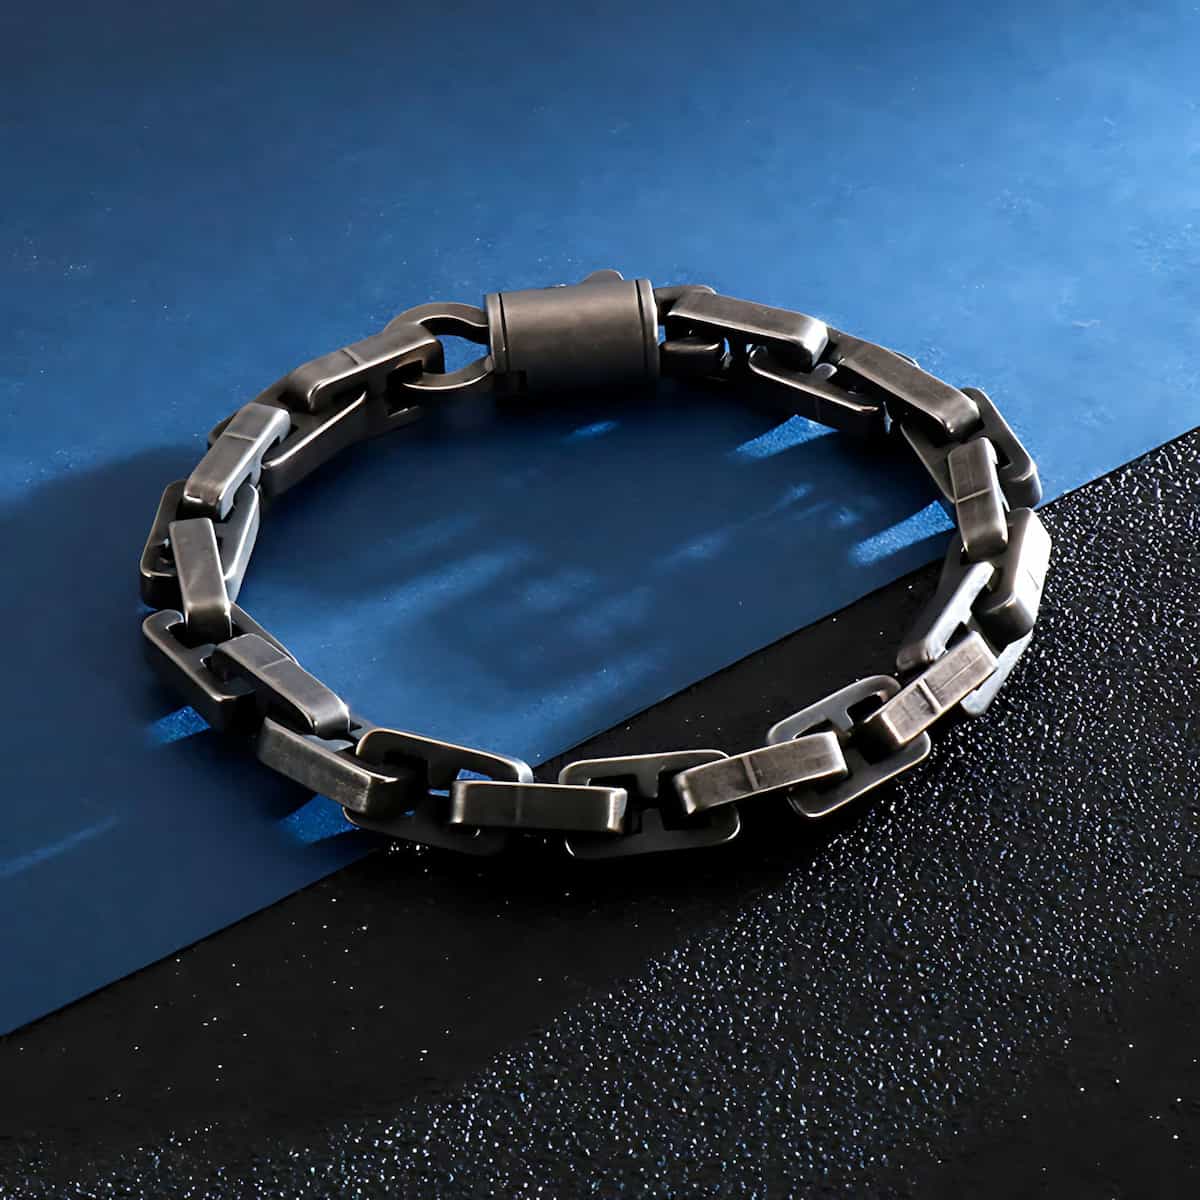 Stainless Steel Square Cuban Link Bracelet Xenos Jewelry